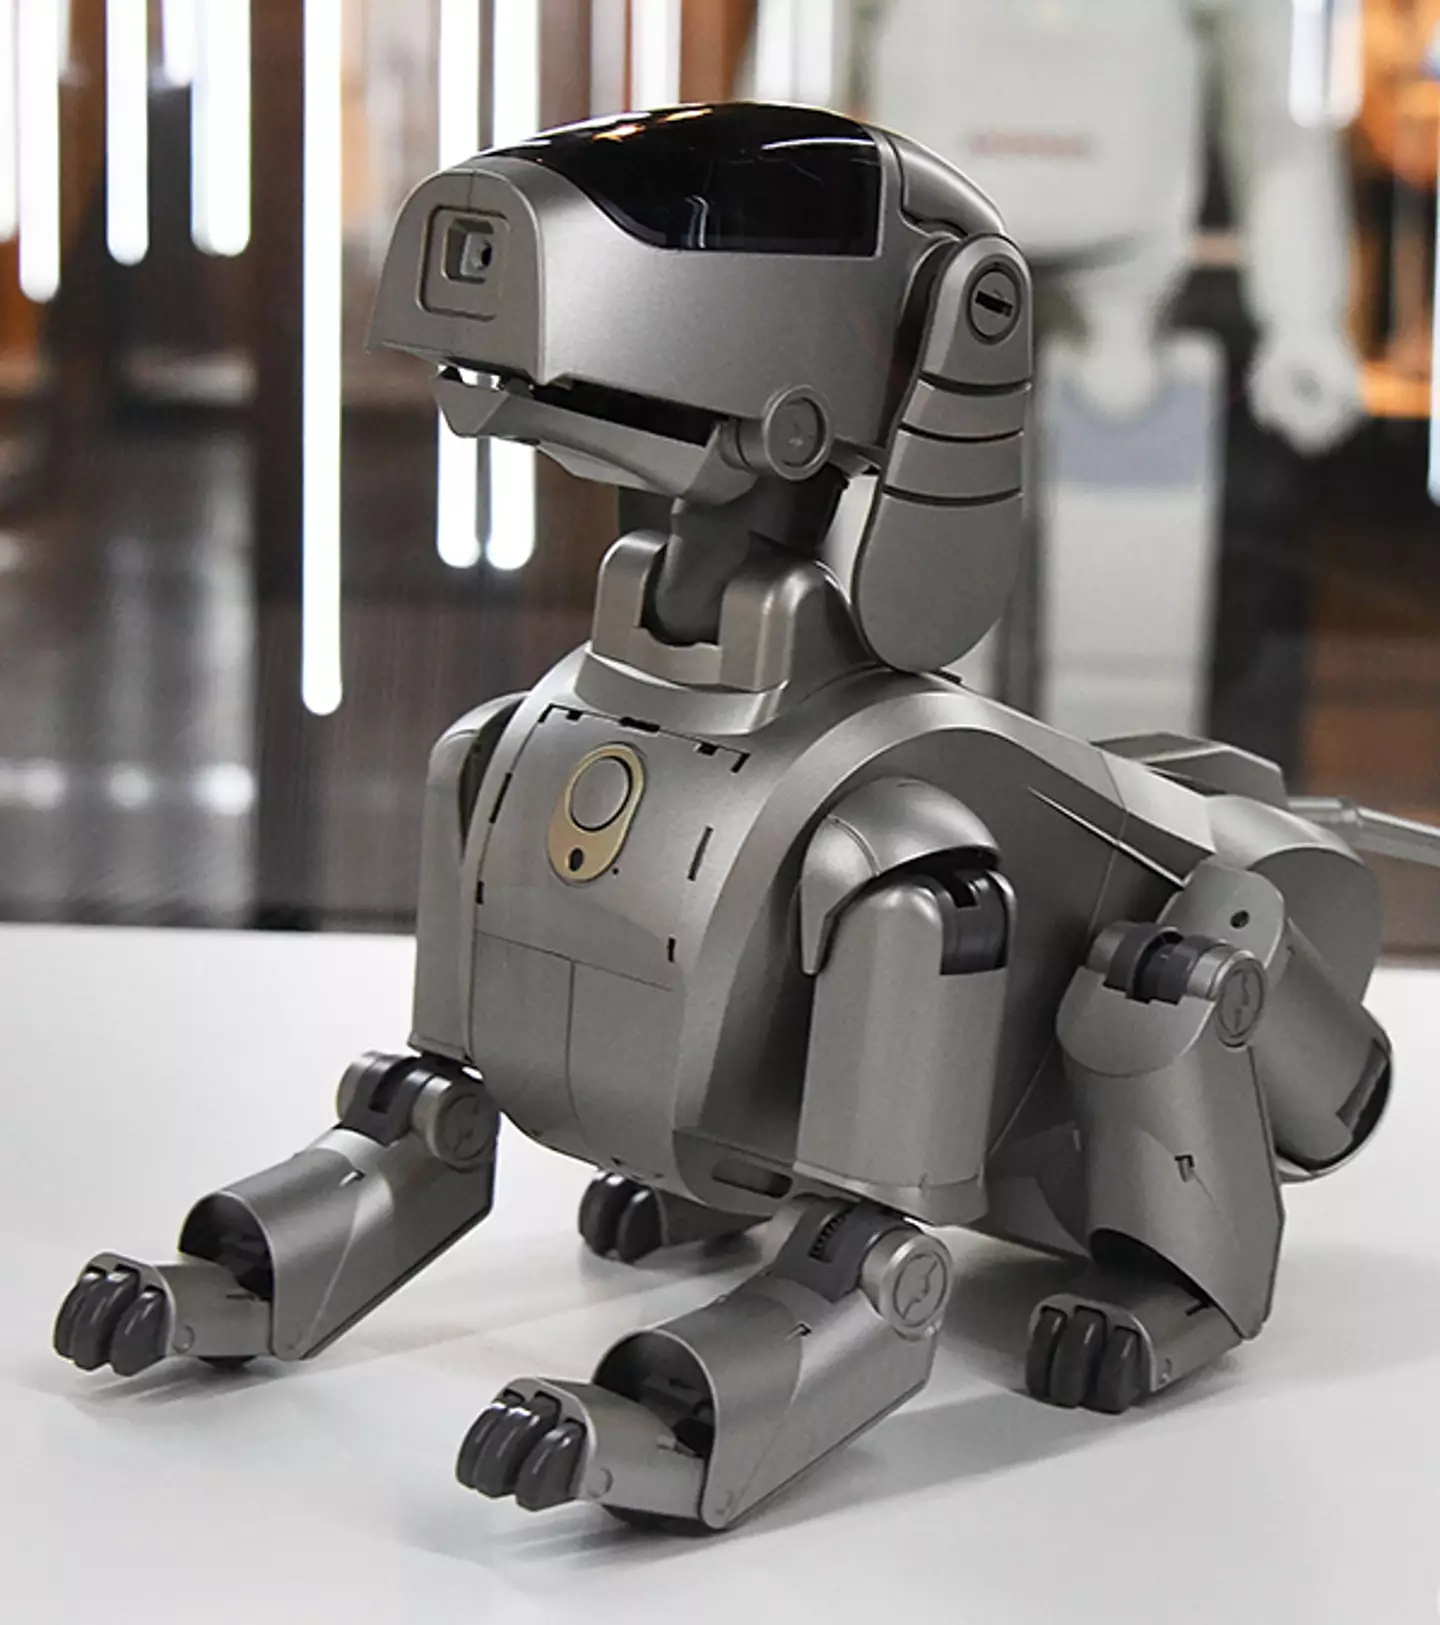 Scientists studied that robotic dogs could be the key to beating stress / Jun Sato/Getty Images